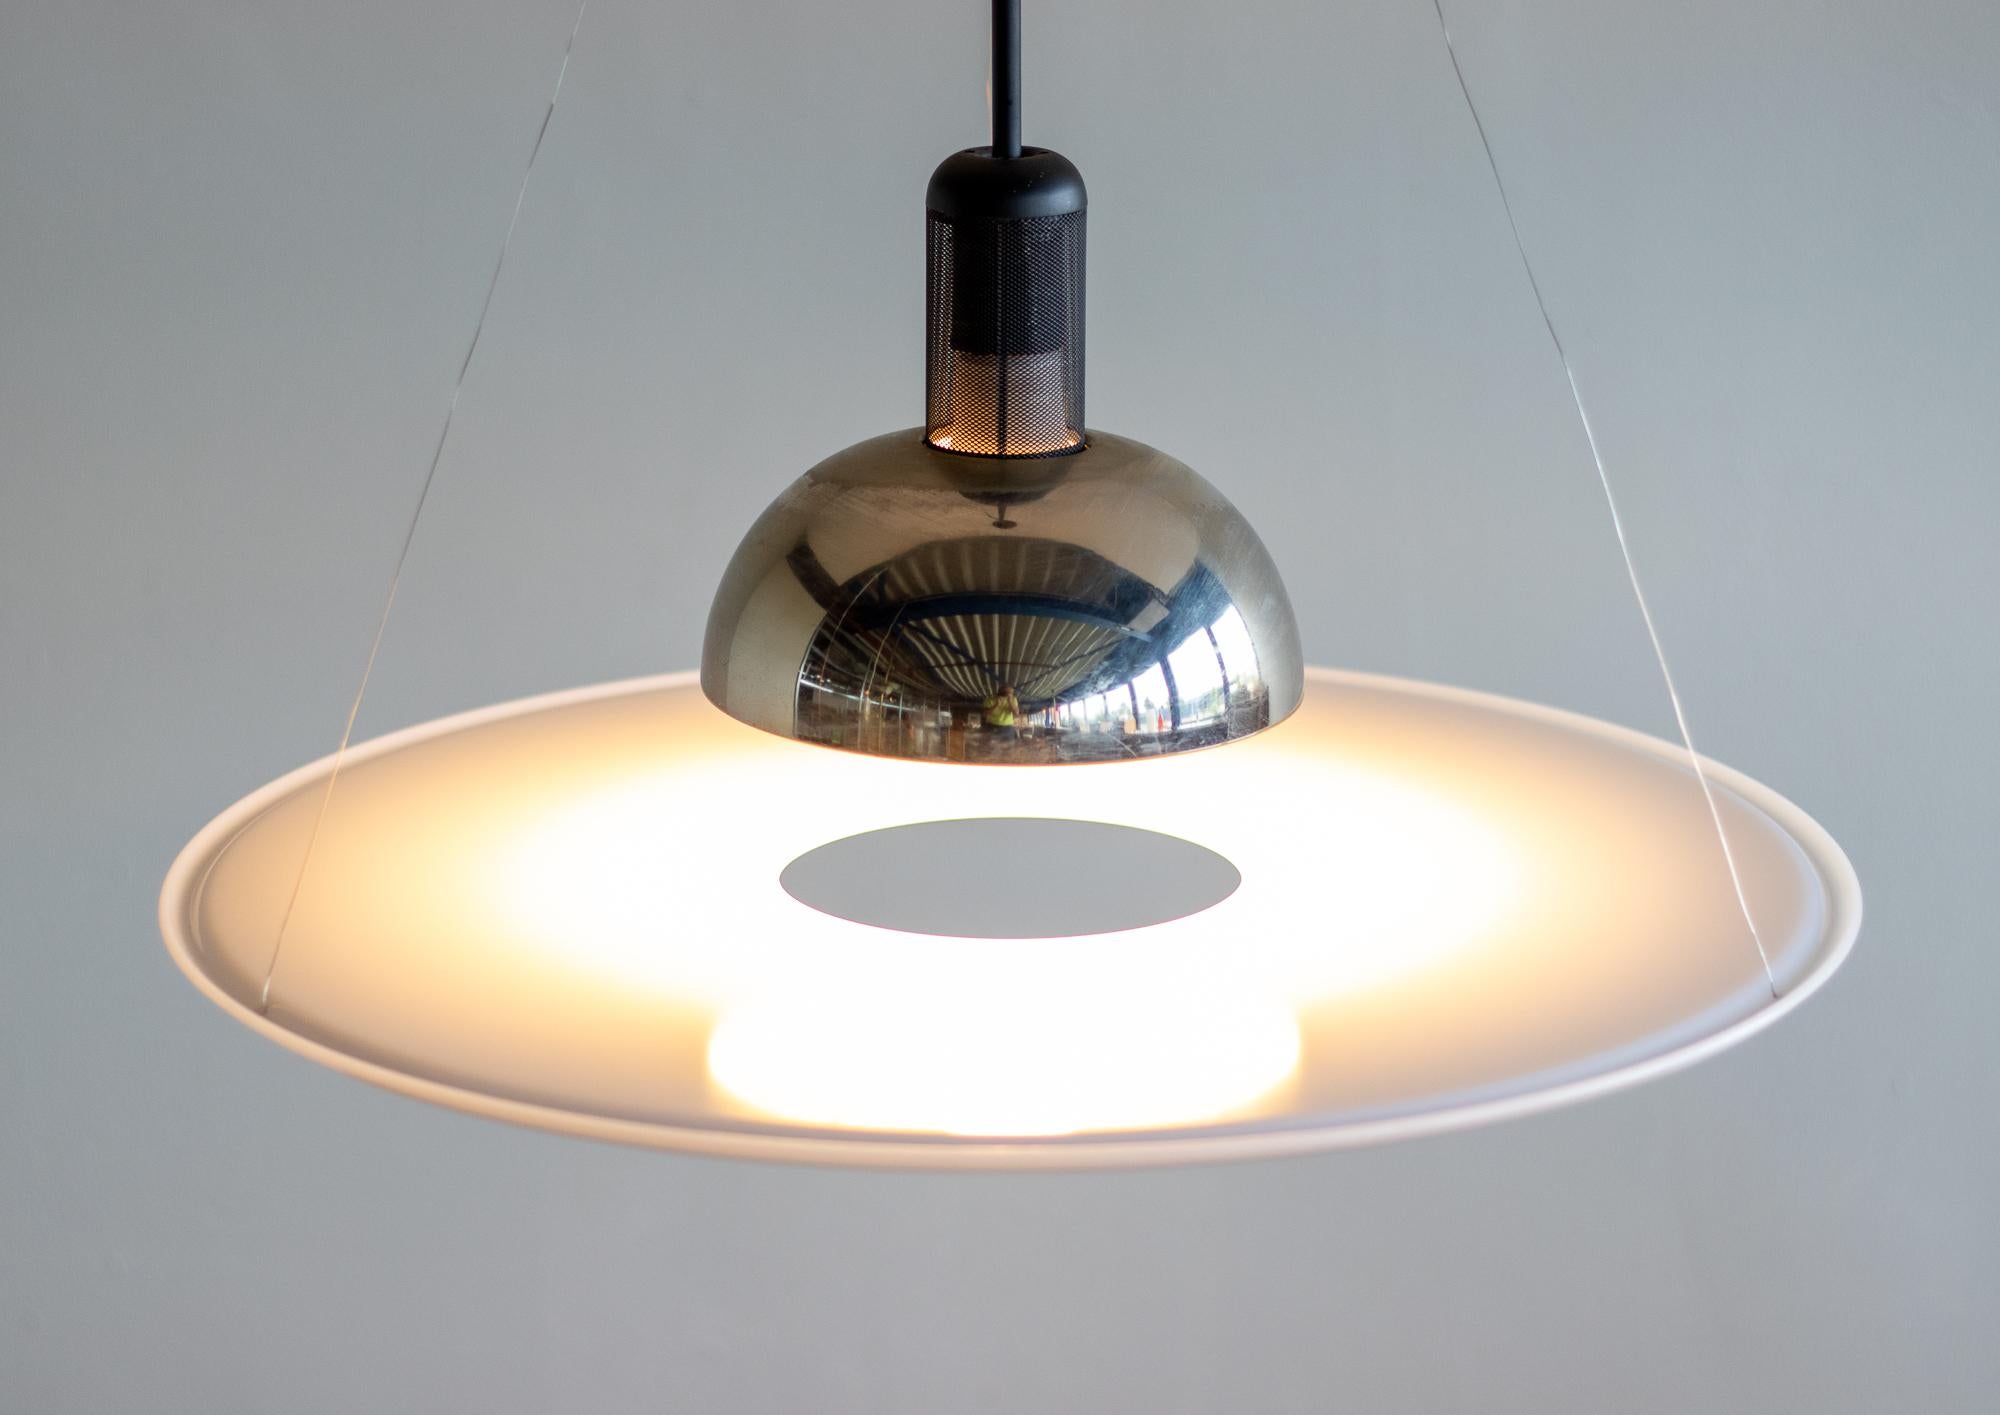 Suspension lamp providing direct, diffused and reflected light. 
Original early edition purchased directly from 1st owner.
A great classic.